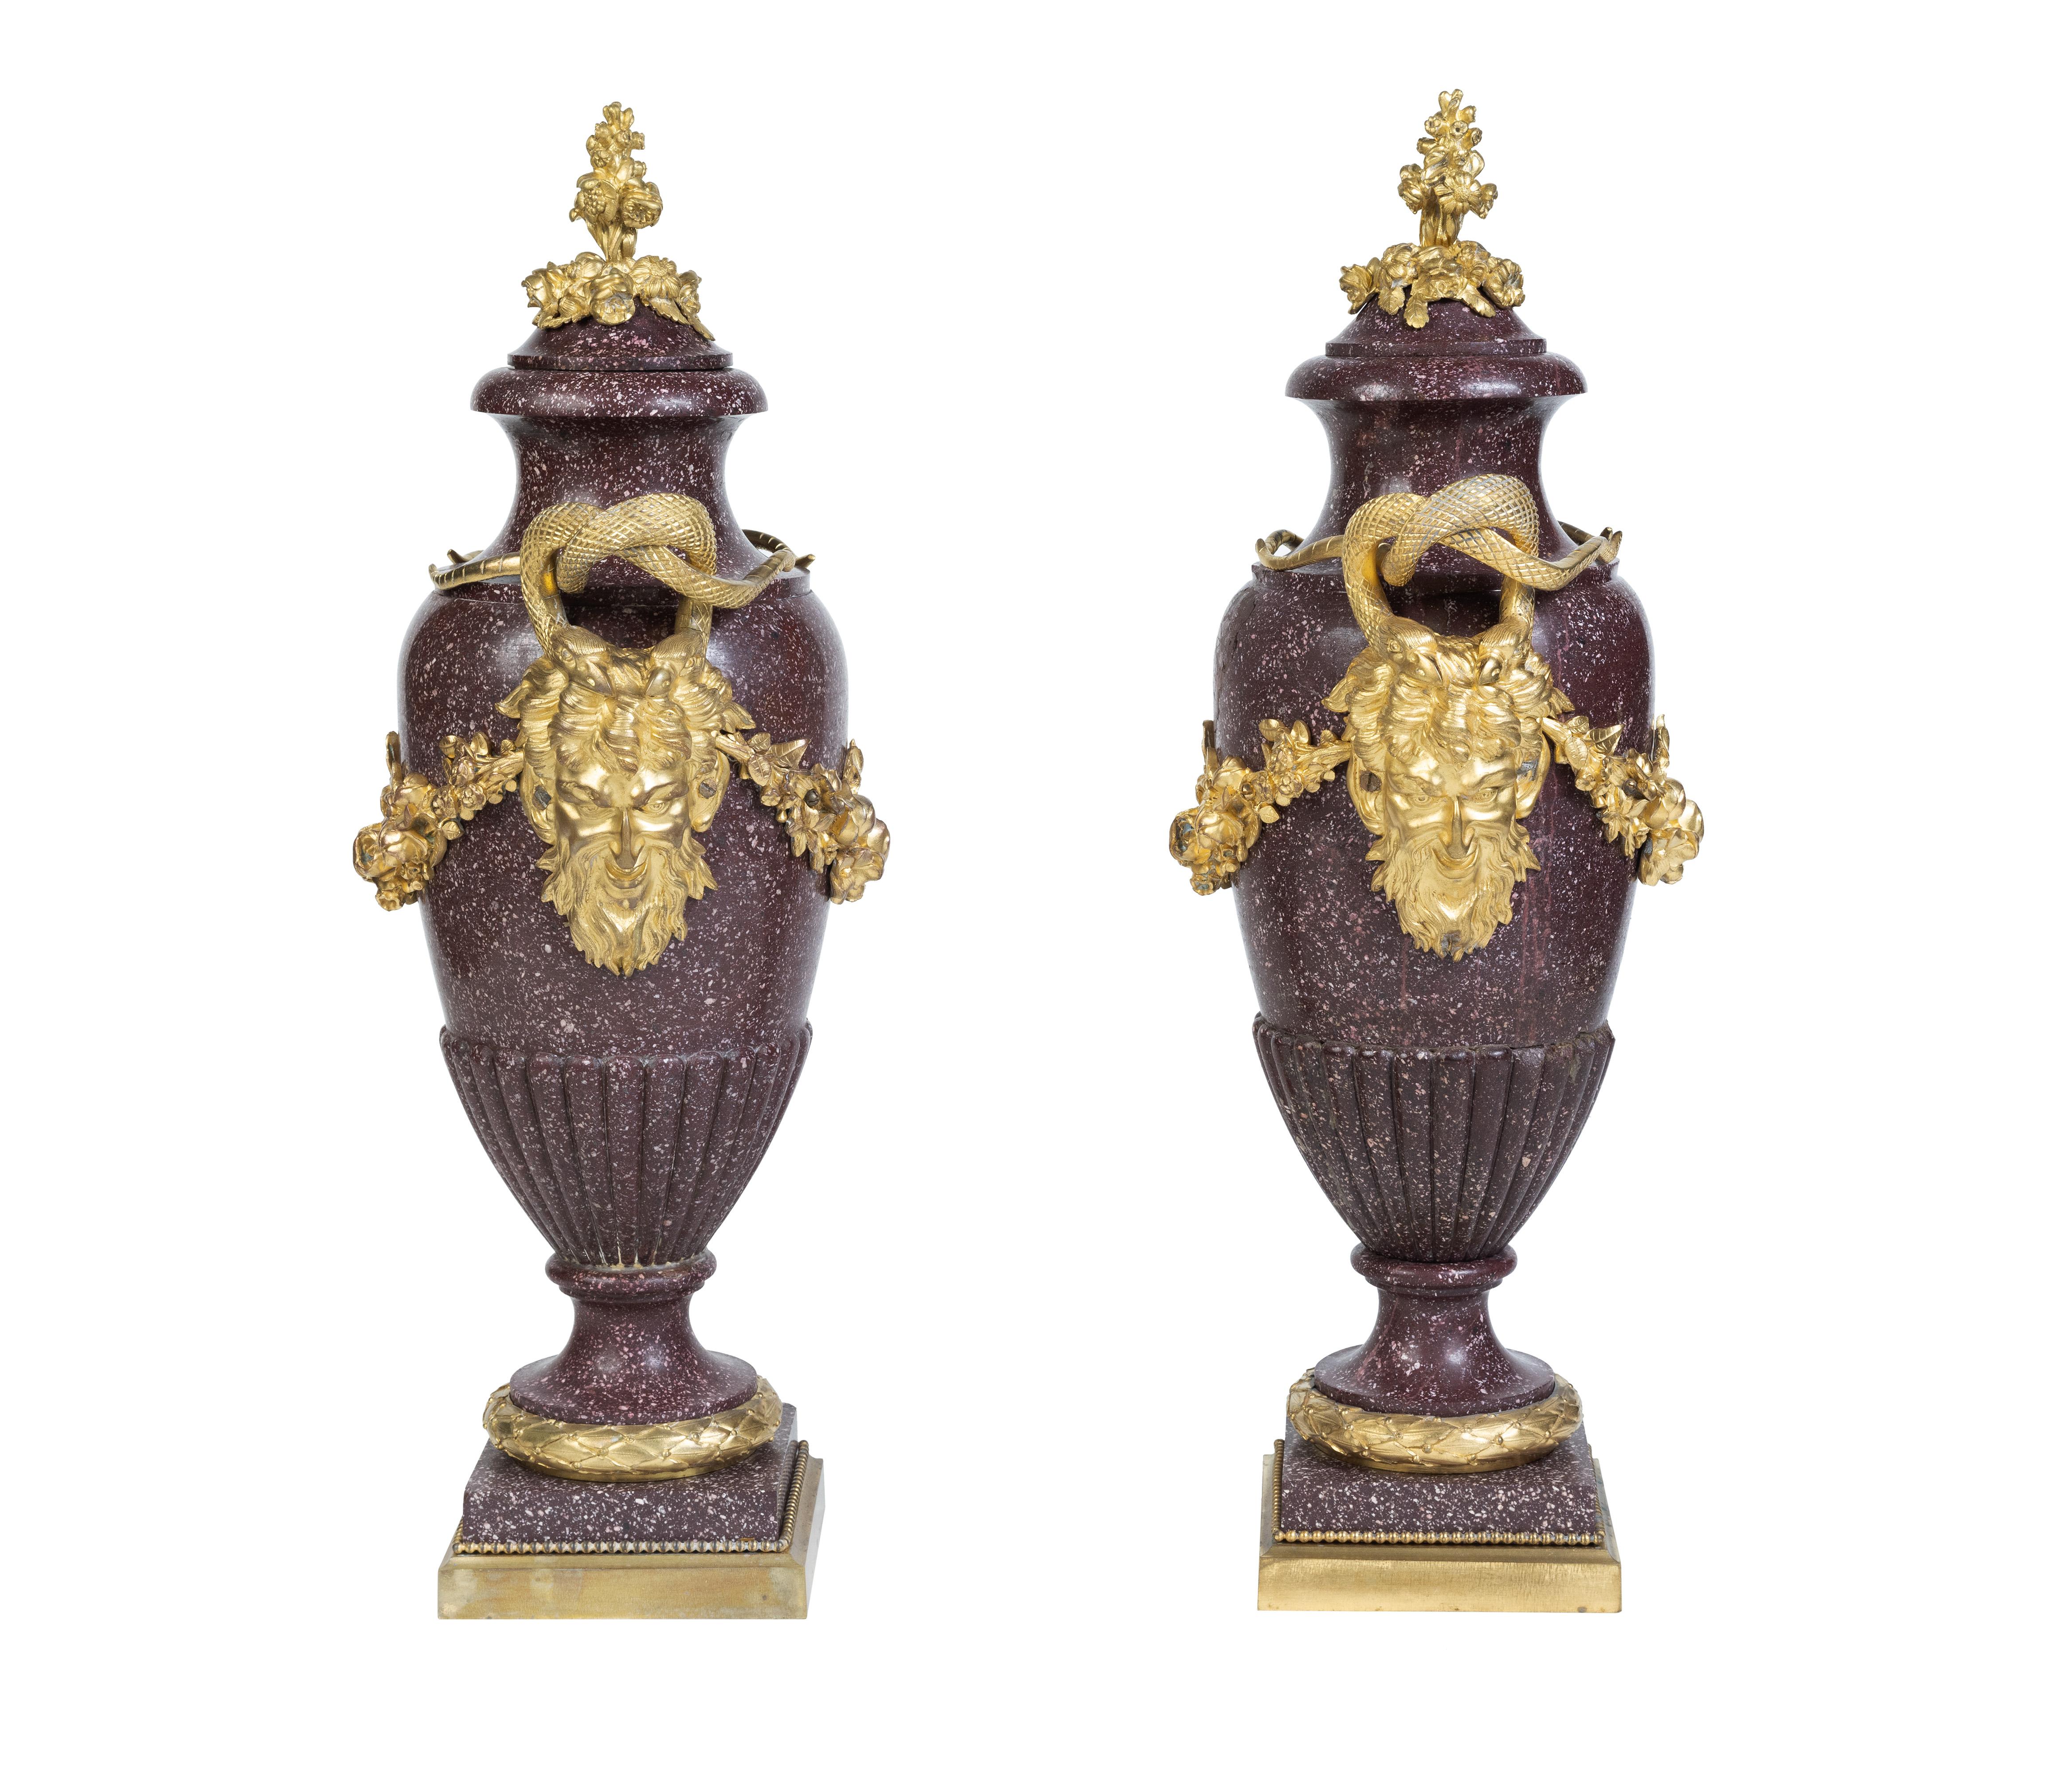 Elegance in Stone and Gilt: 

A Large Pair of French Ormolu-Mounted Egyptian Porphyry Vases, The gilt mounts 19th Century, the Porphyry, circa 1700's.

Embark on a journey through time with this exceptional pair of Large French Ormolu-Mounted